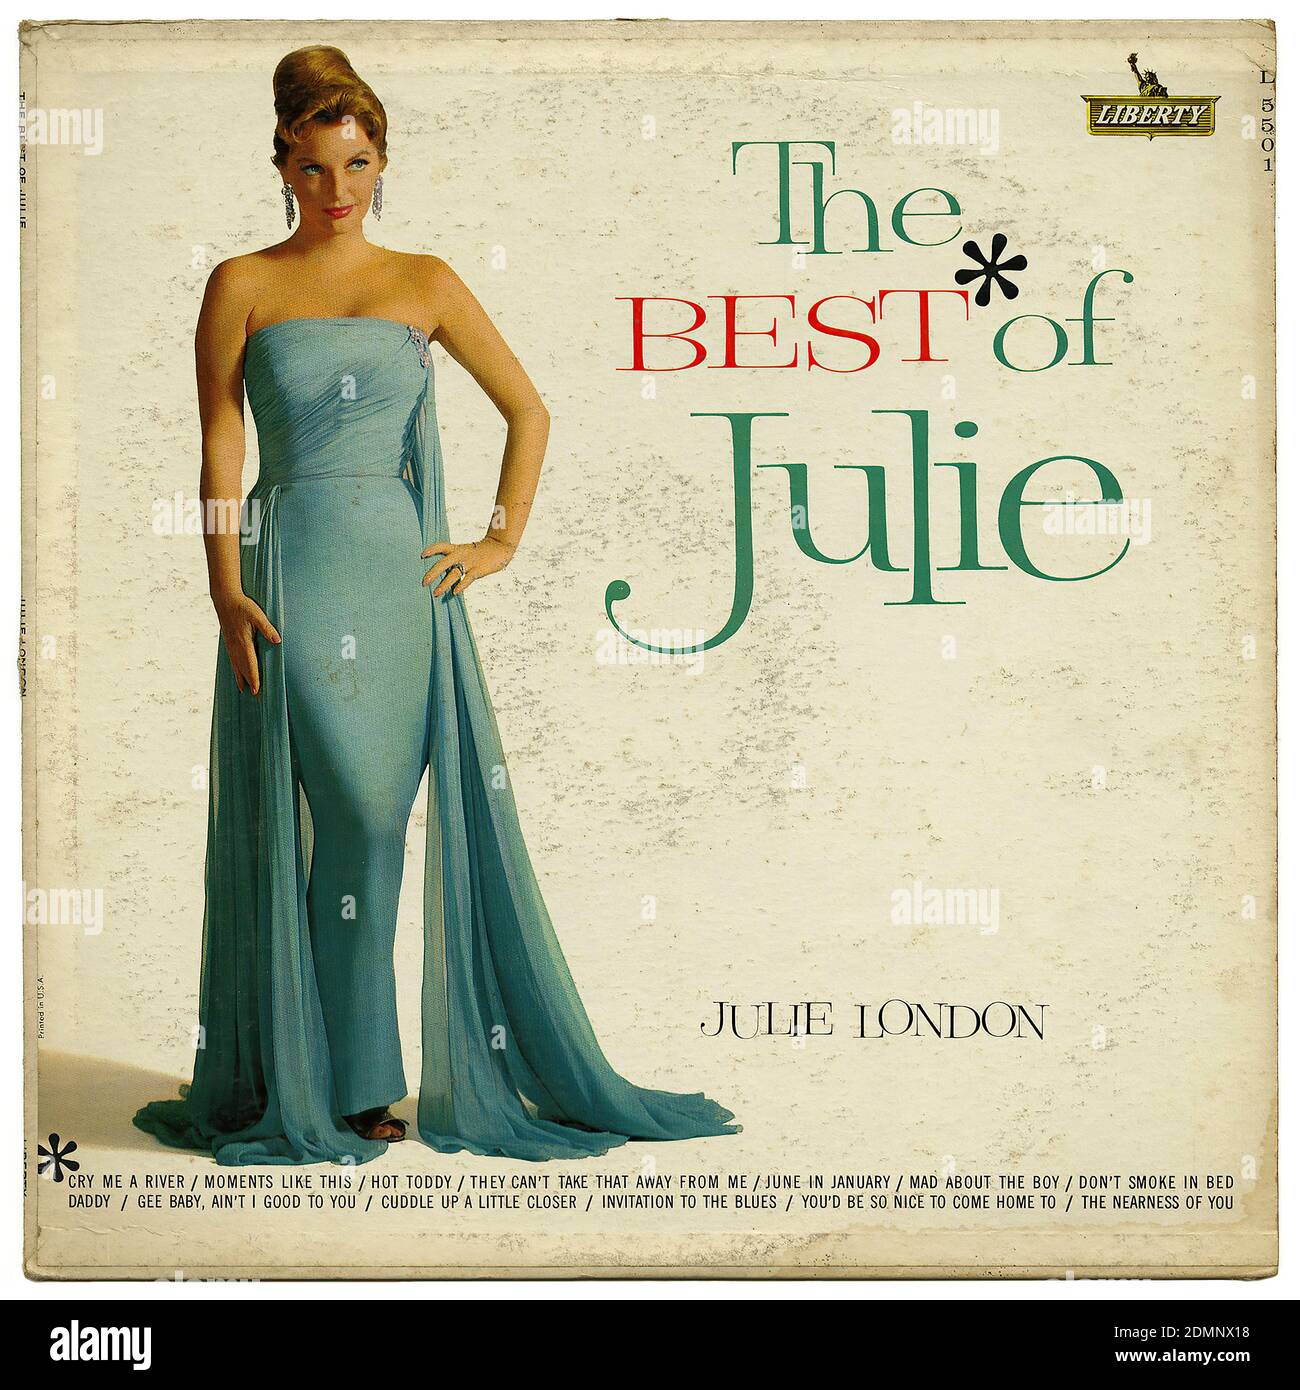 The Best of Julie, Julie London - Vintage Record Cover Stock Photo